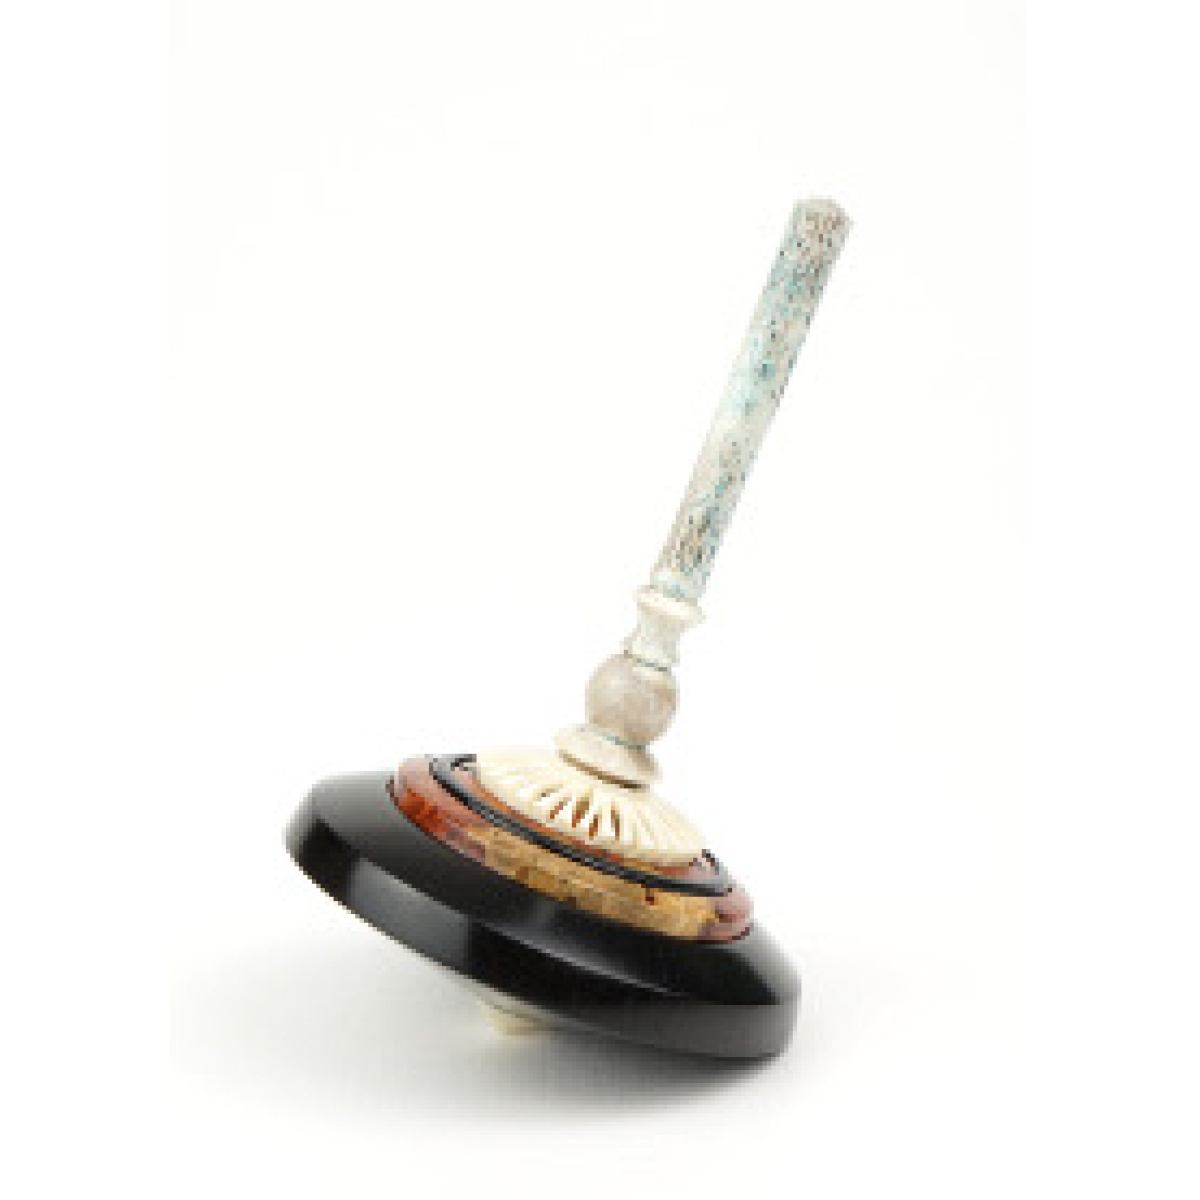 Collector's item: Filigree Artist's Spinning Top made of Precious Wood, Bone and Horn